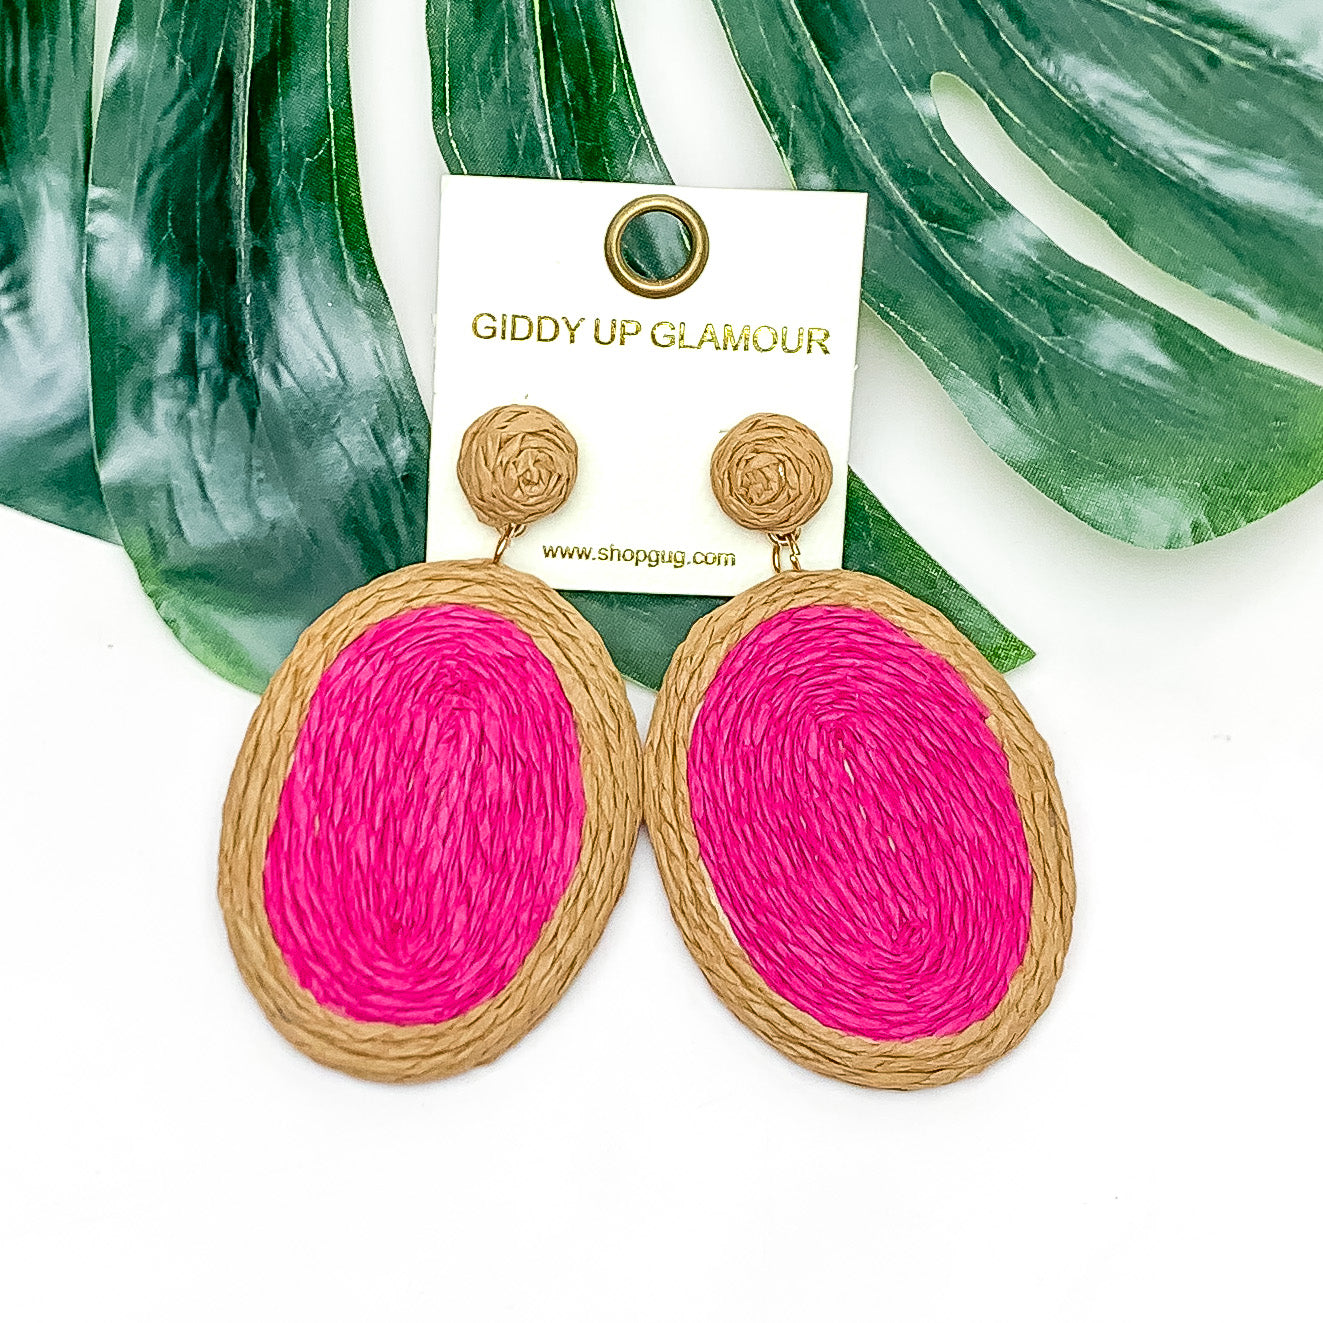 Brunch Bash Raffia Wrapped Oval Earrings in Hot Pink. Pictured on a white background with a large leaf behind the earrings.